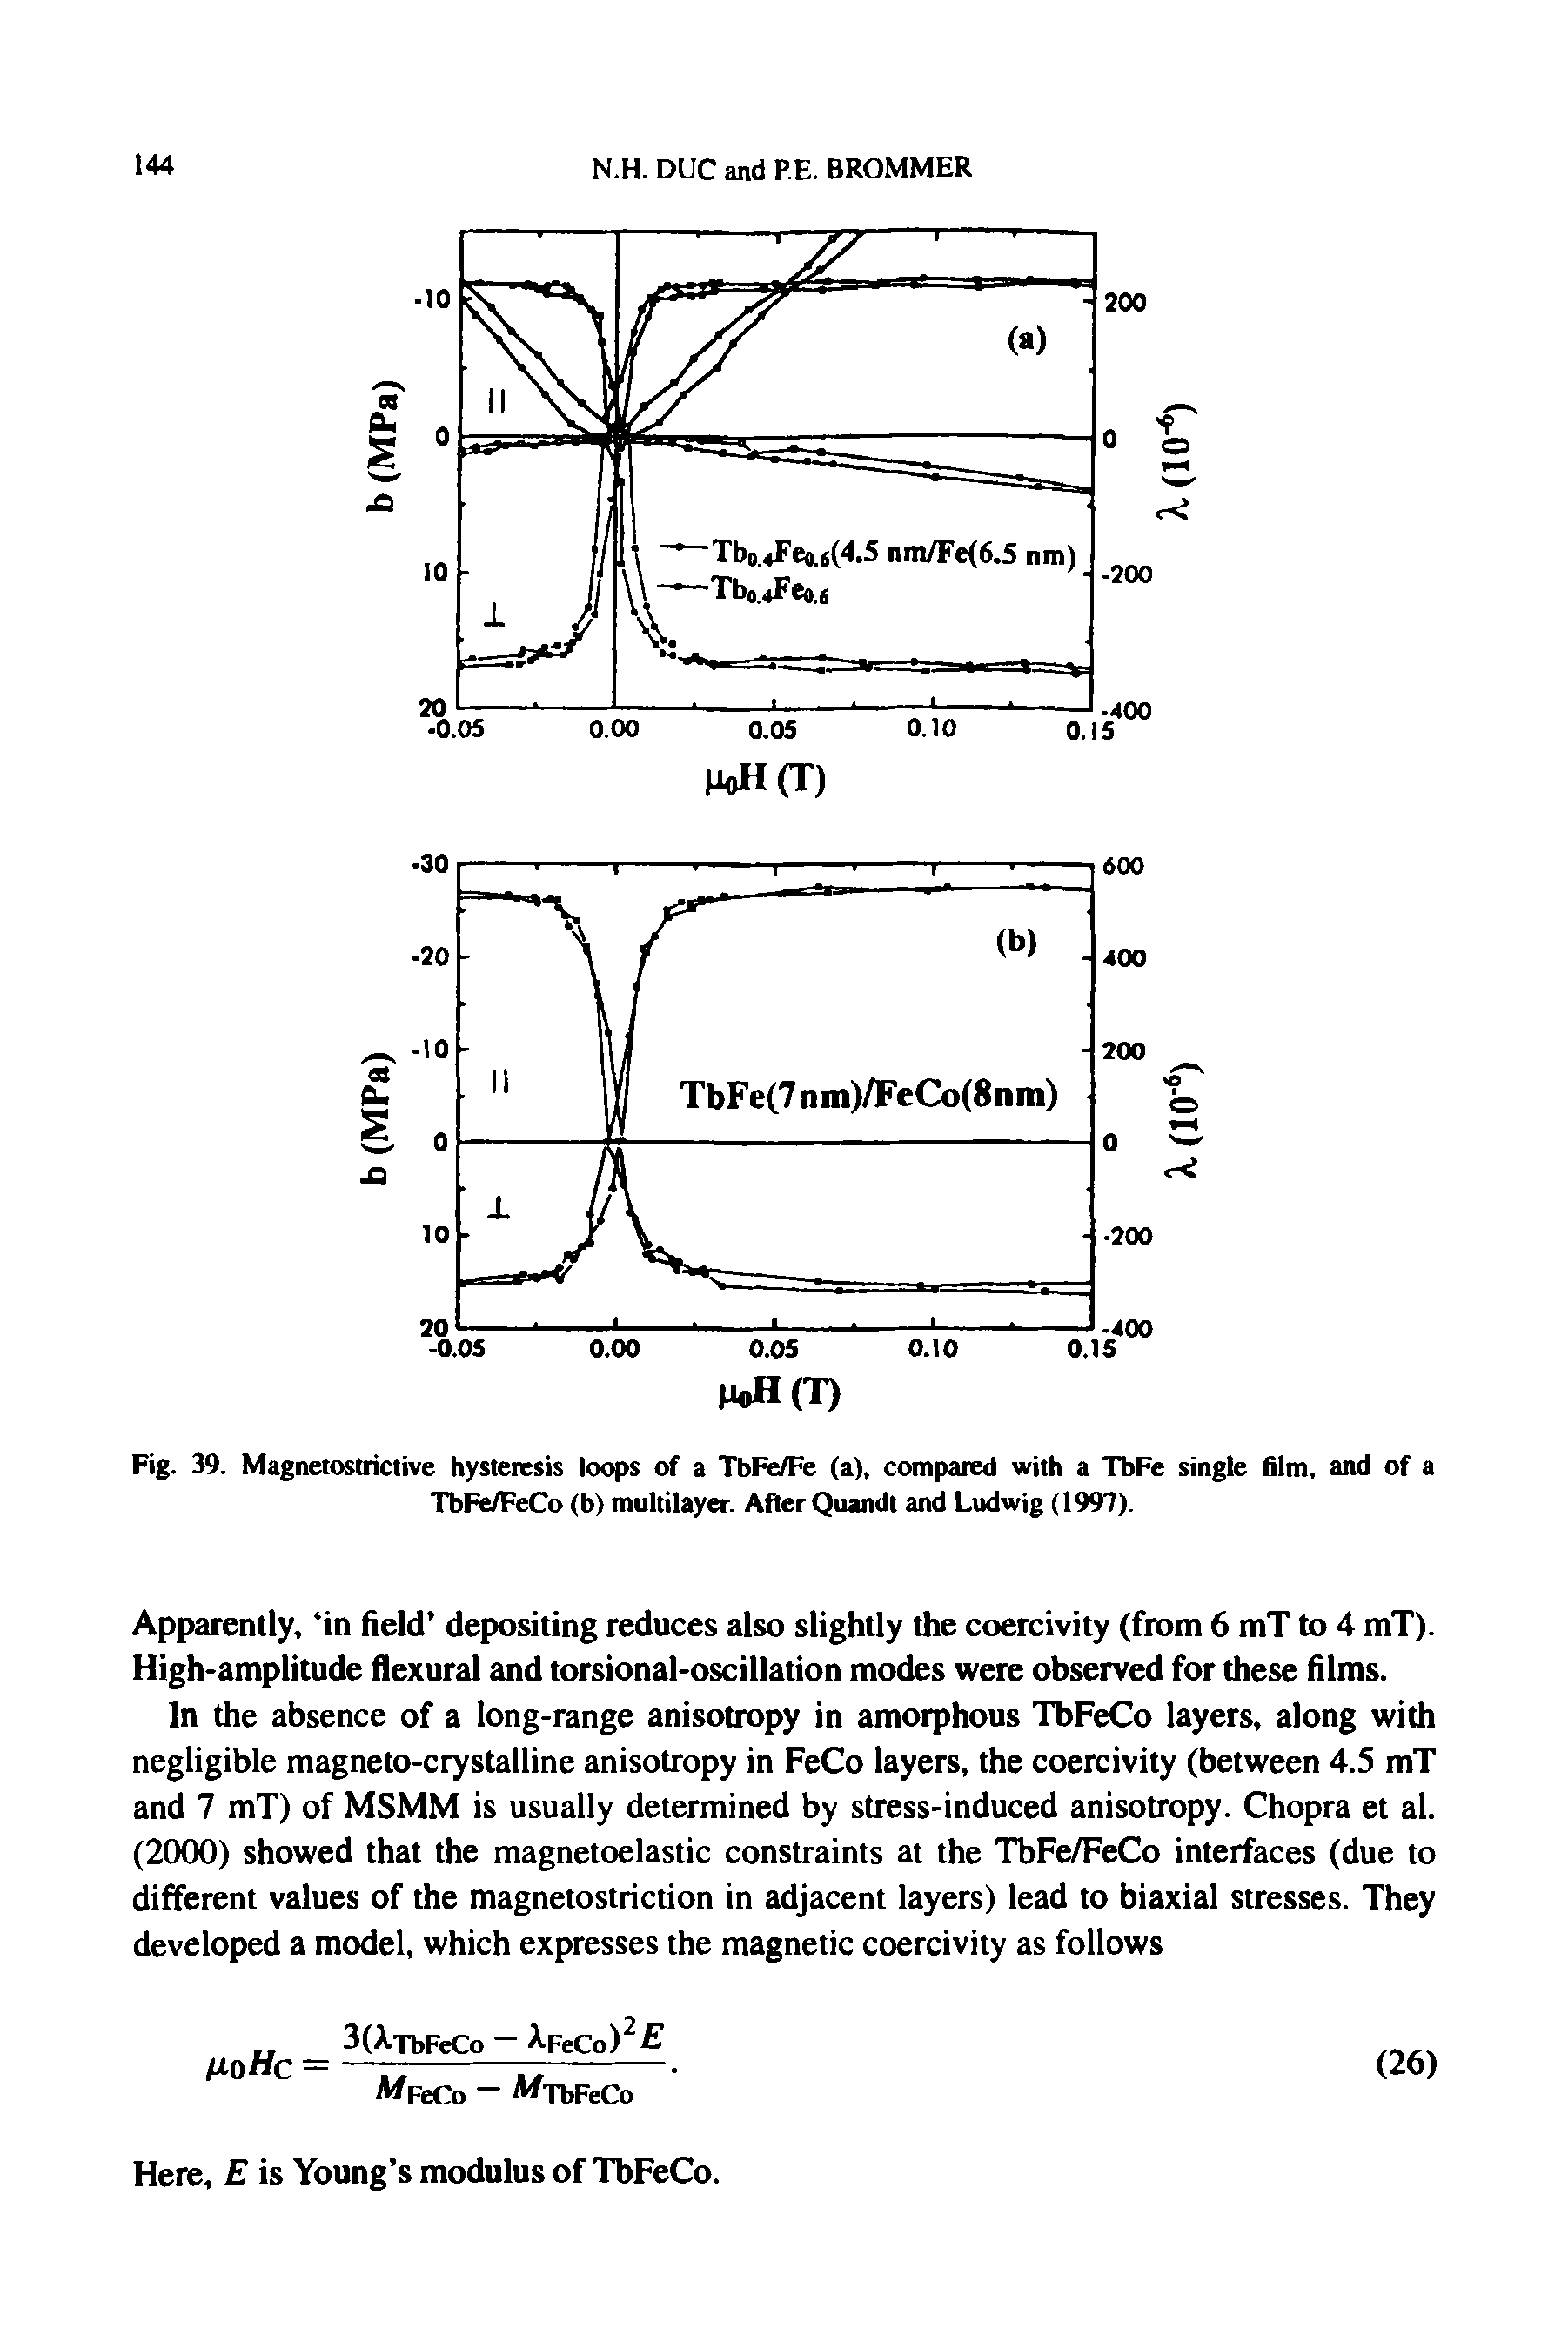 Fig. 39. Magnetostrictive hysteresis loops of a TbFe/Fe (a), compared with a TbFe single film, and of a TbFe/FeCo (b) multilayer. After Quandt and Ludwig (1997).